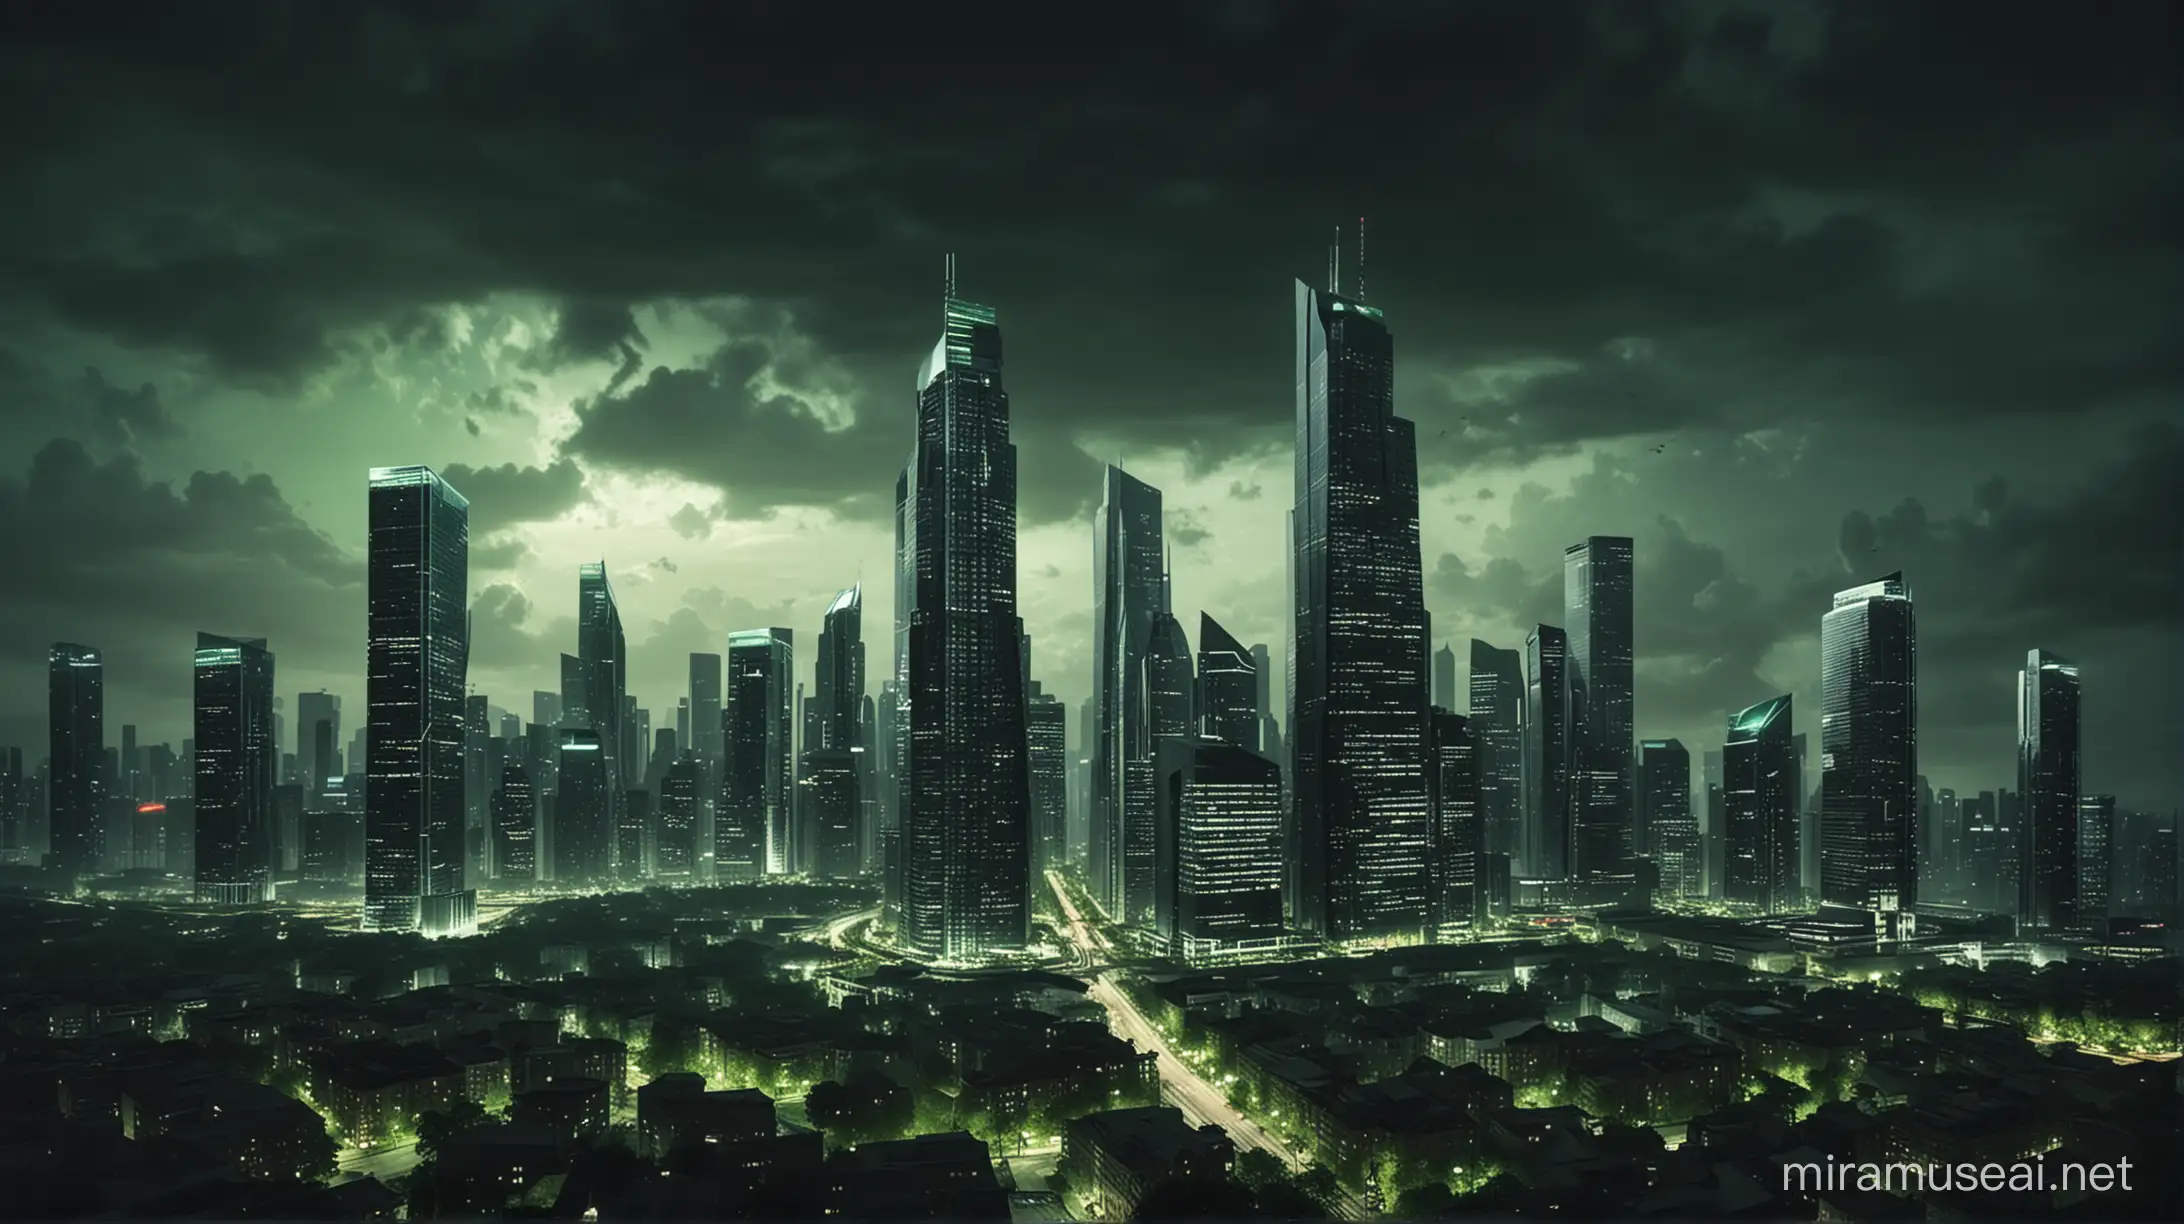 Majestic Cityscape at Dusk Towering Green Skyscrapers in Dark Background